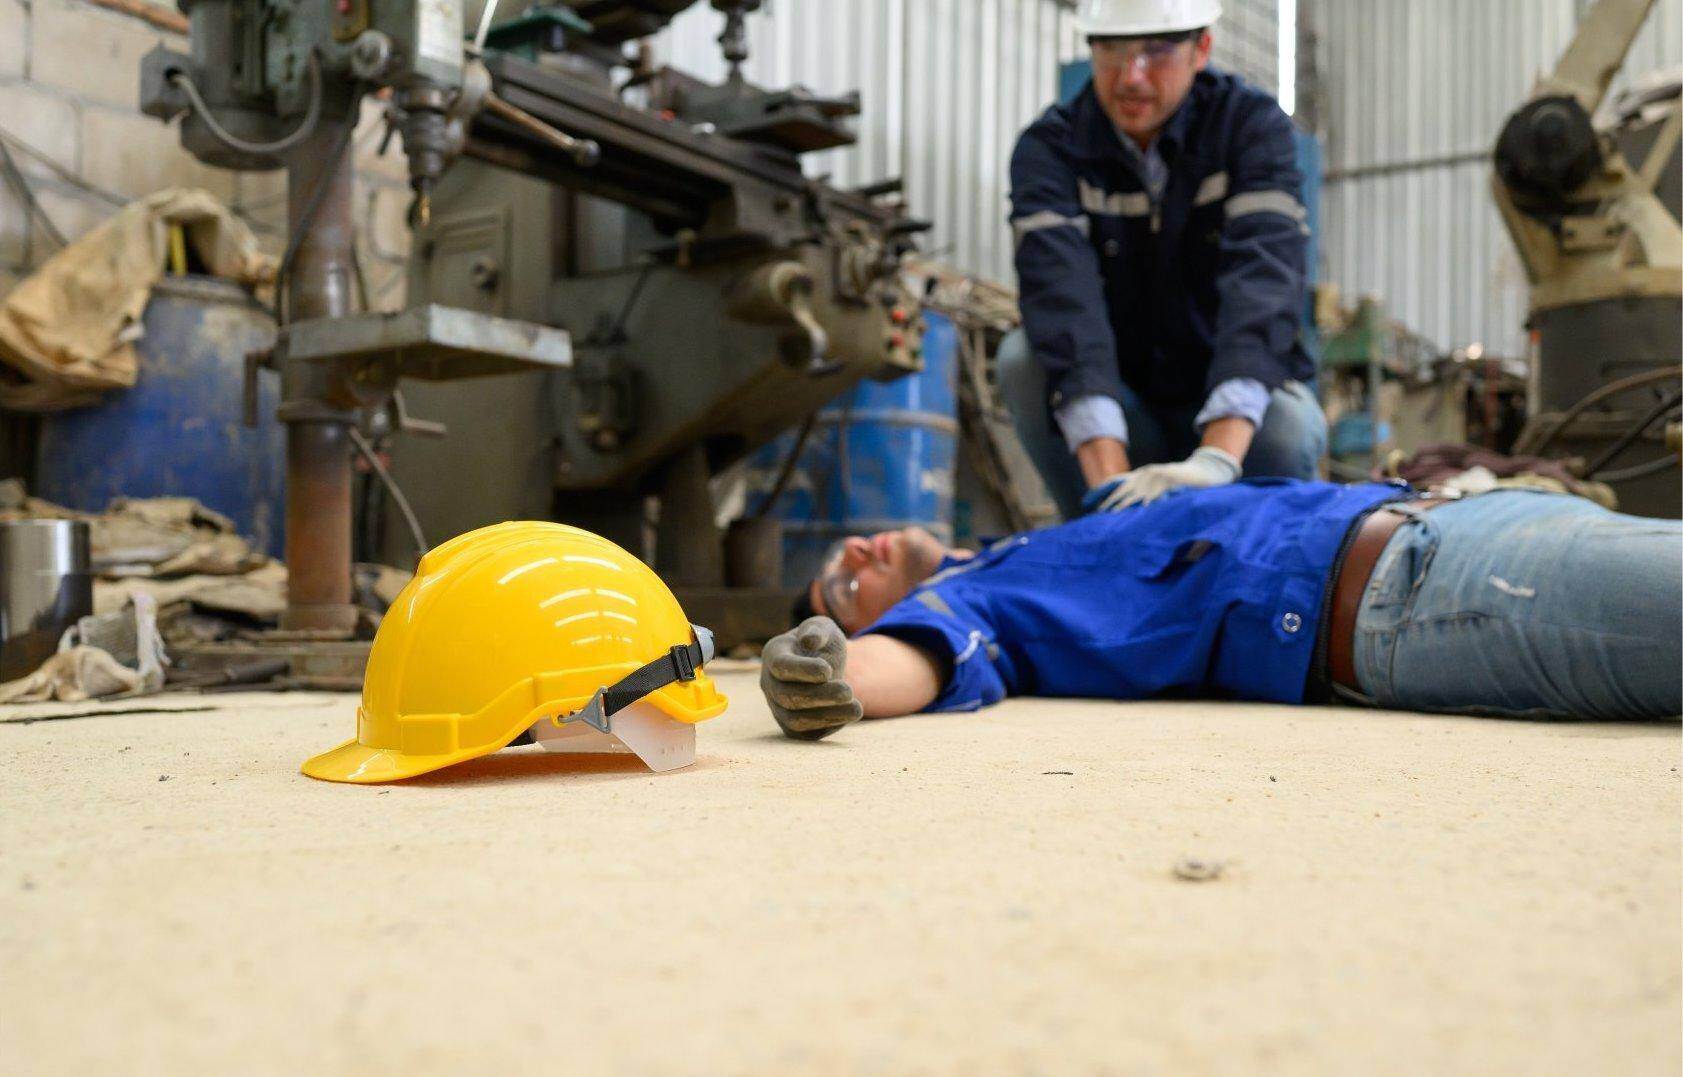 An unconscious man who has been injured on the job who will file for workers compensation in Powder Springs, Georgia